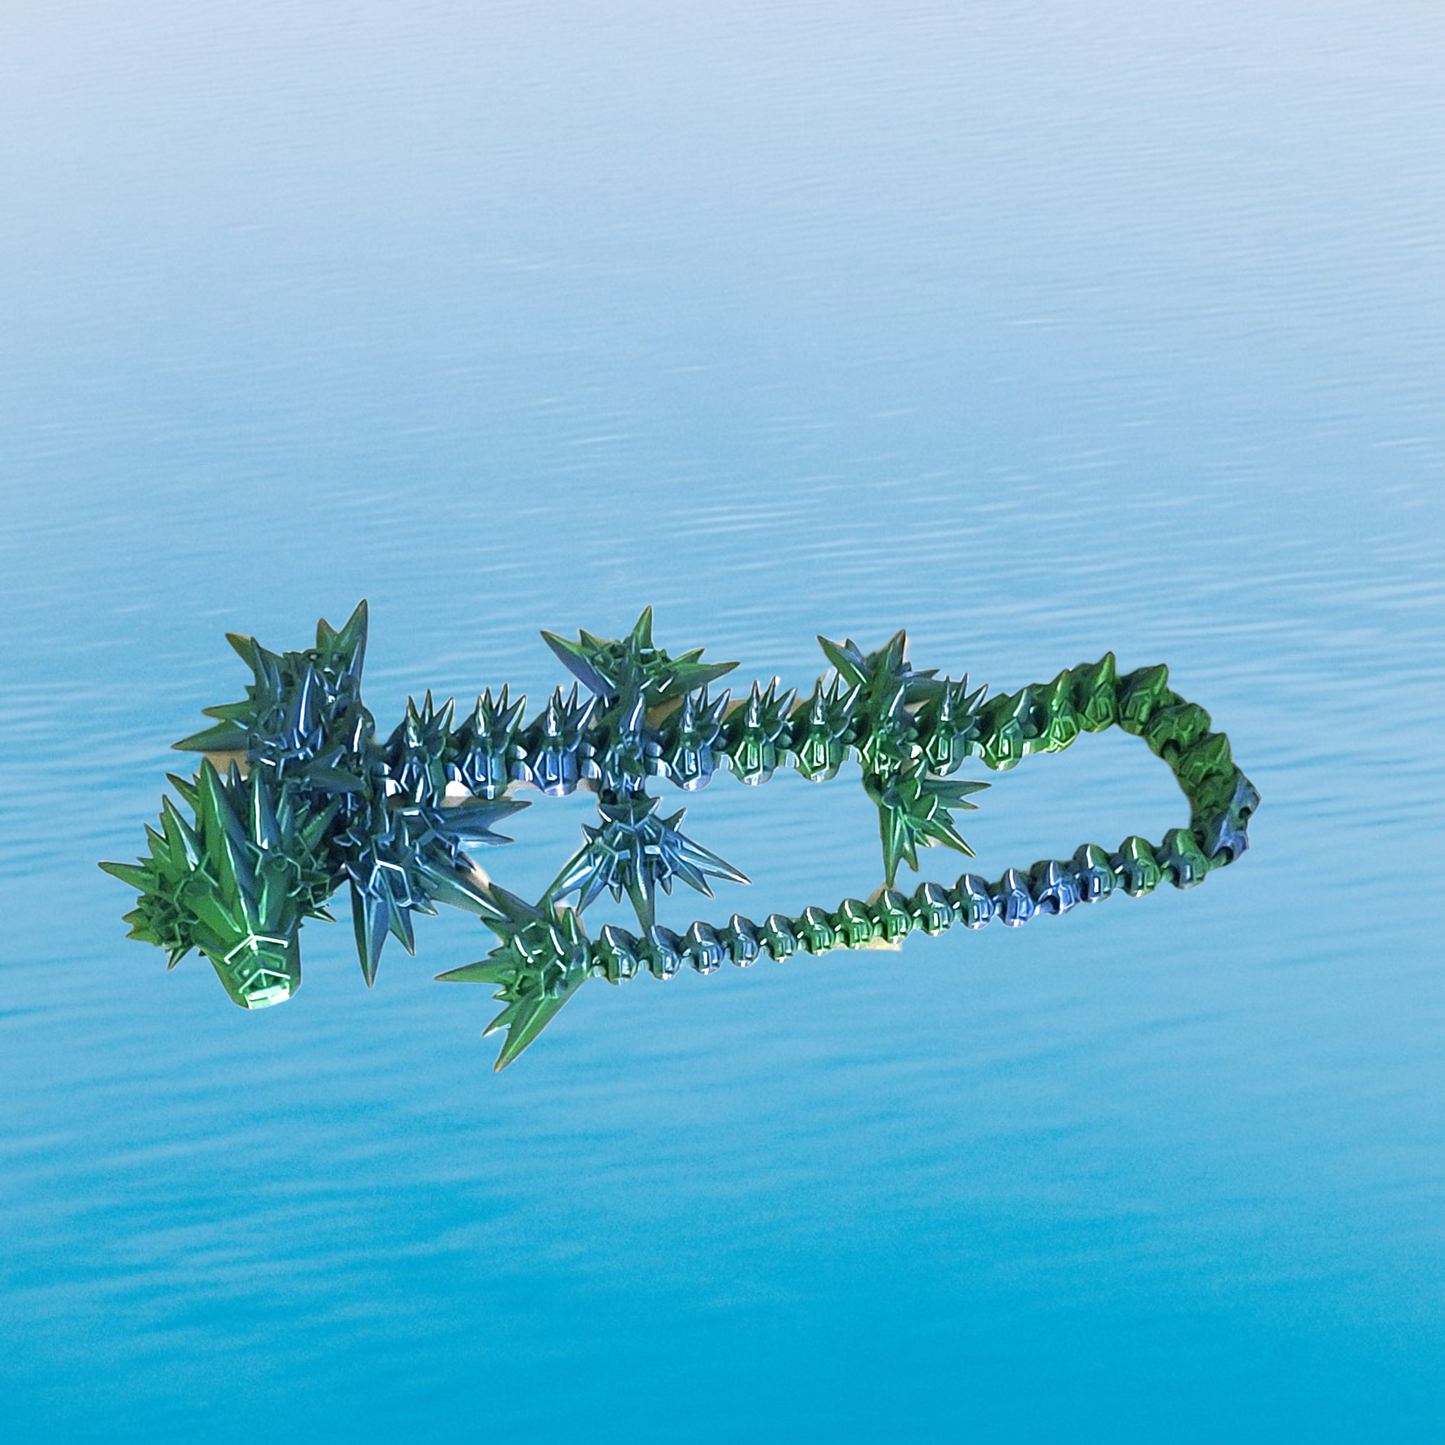 3D Printed Articulated Sea Dragon